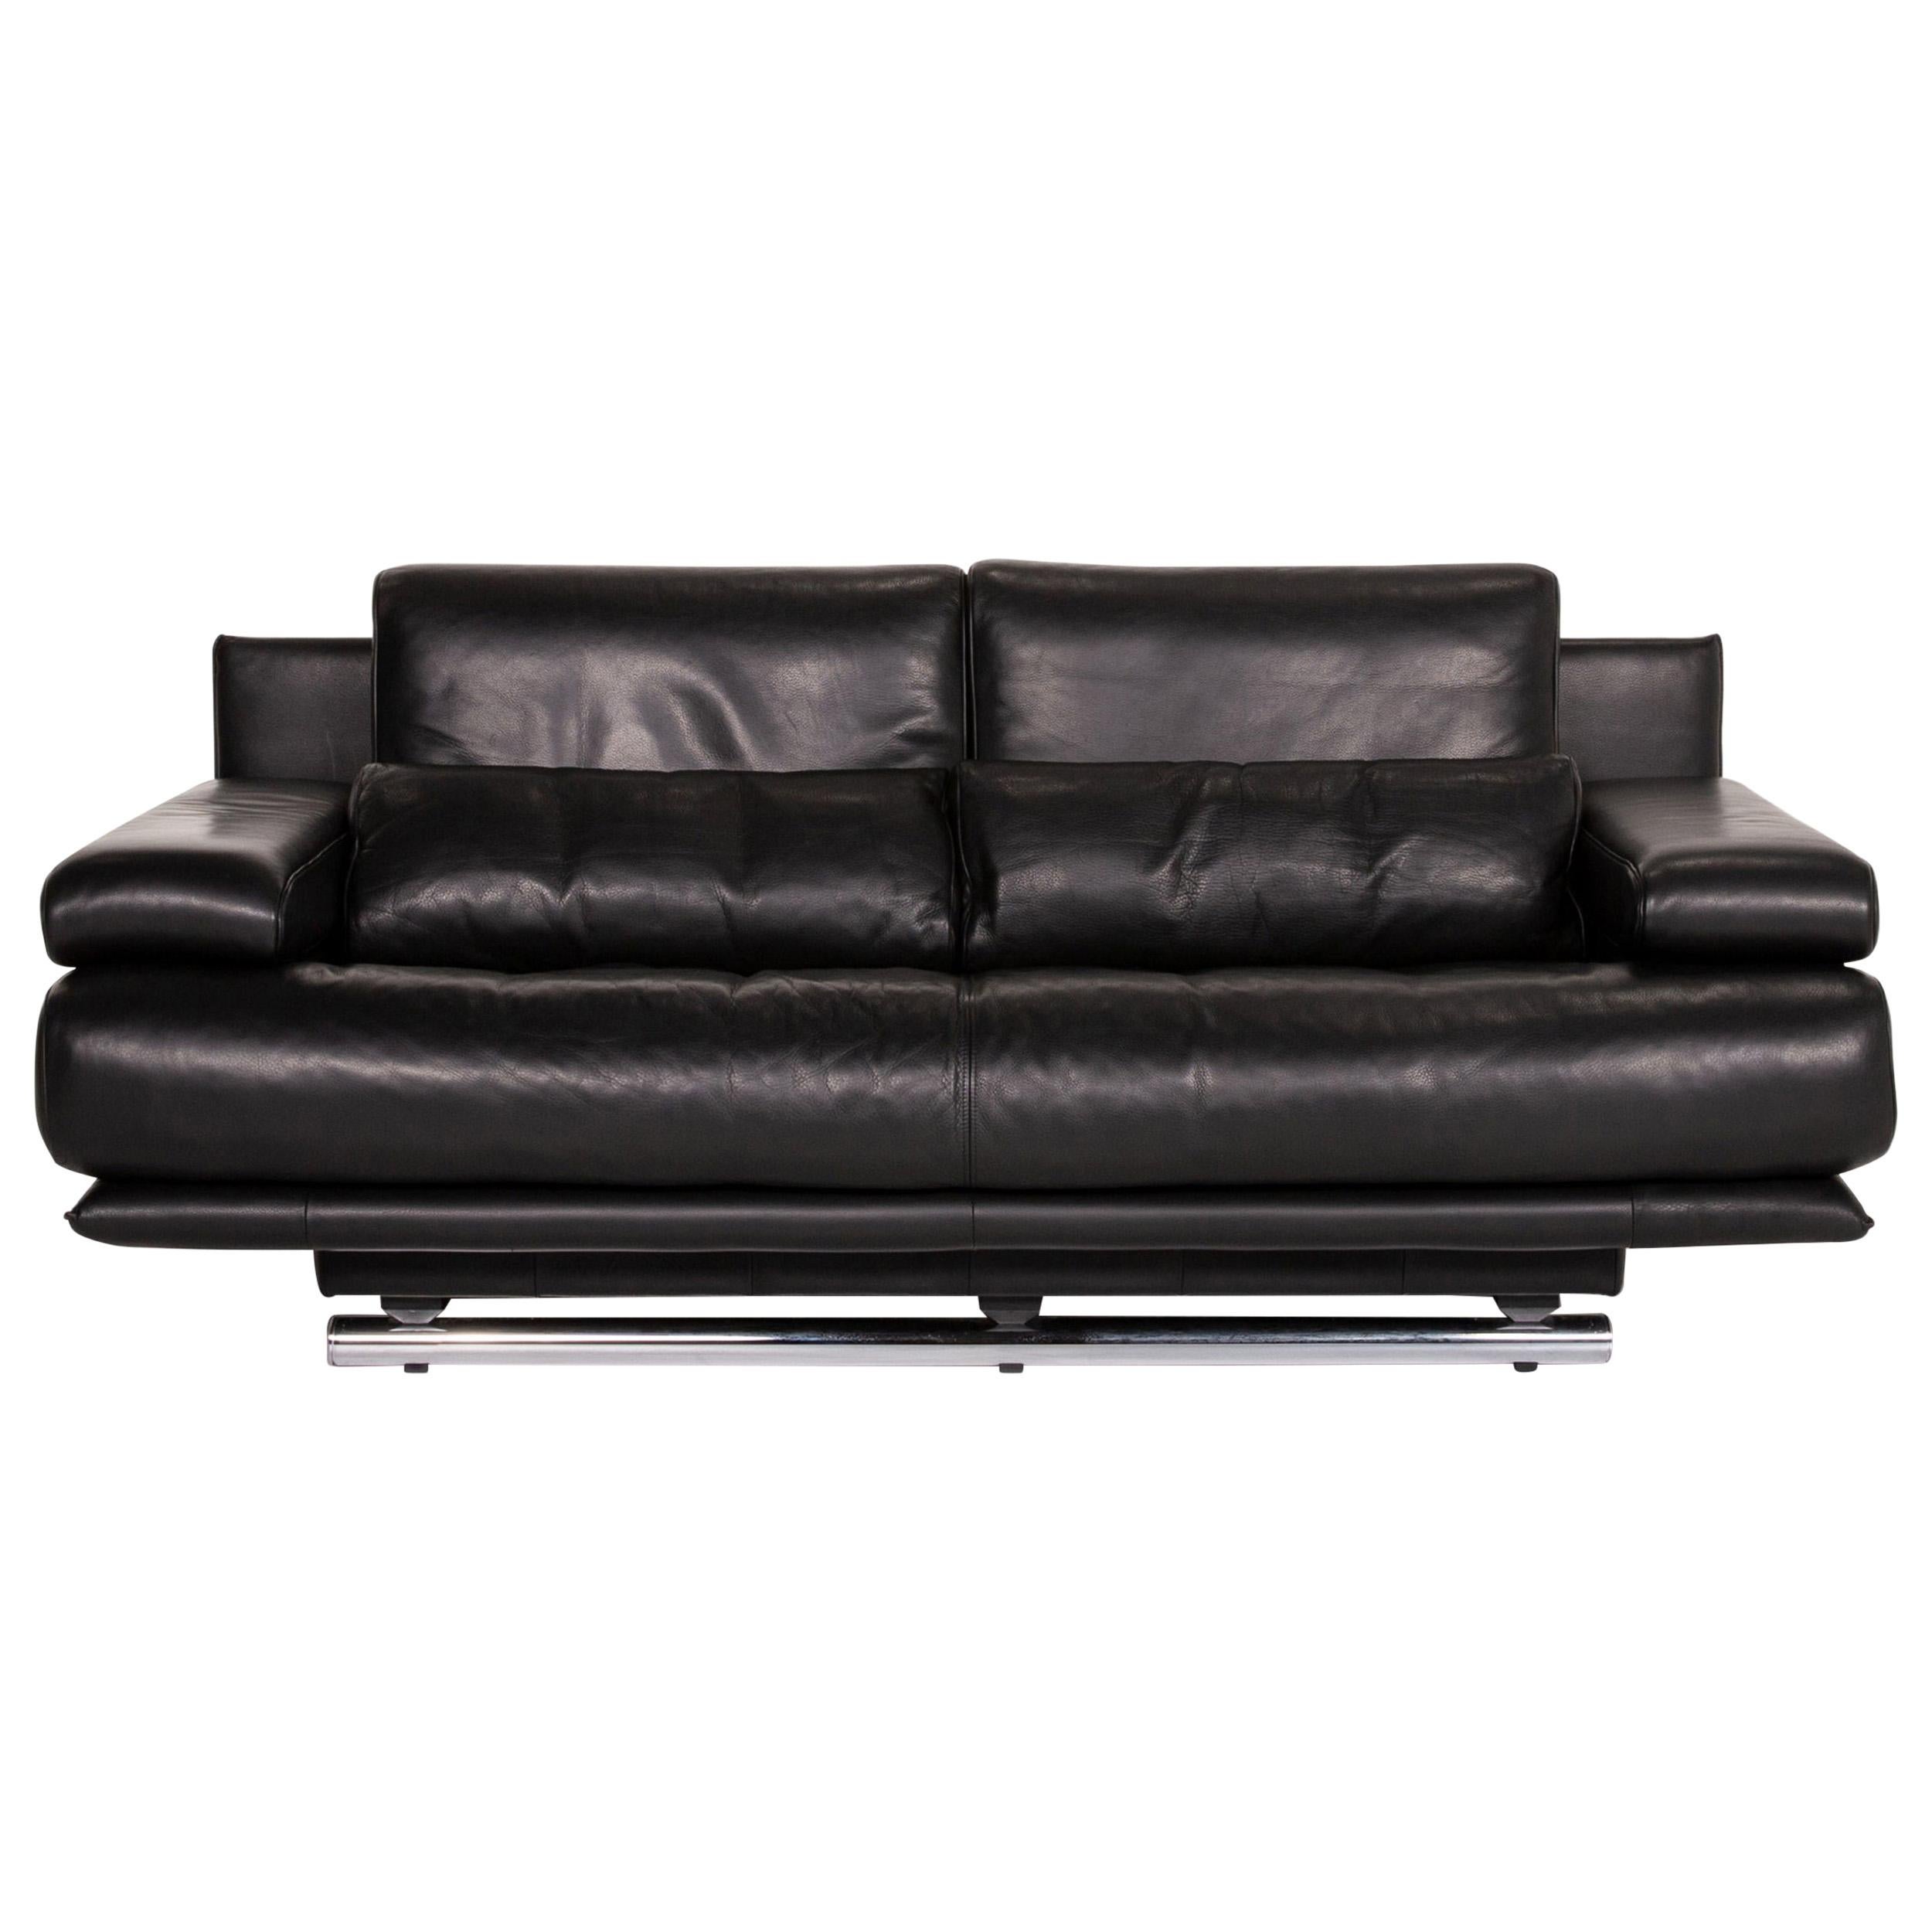 Rolf Benz 6500 Leather Sofa Black Three-Seat Function Couch